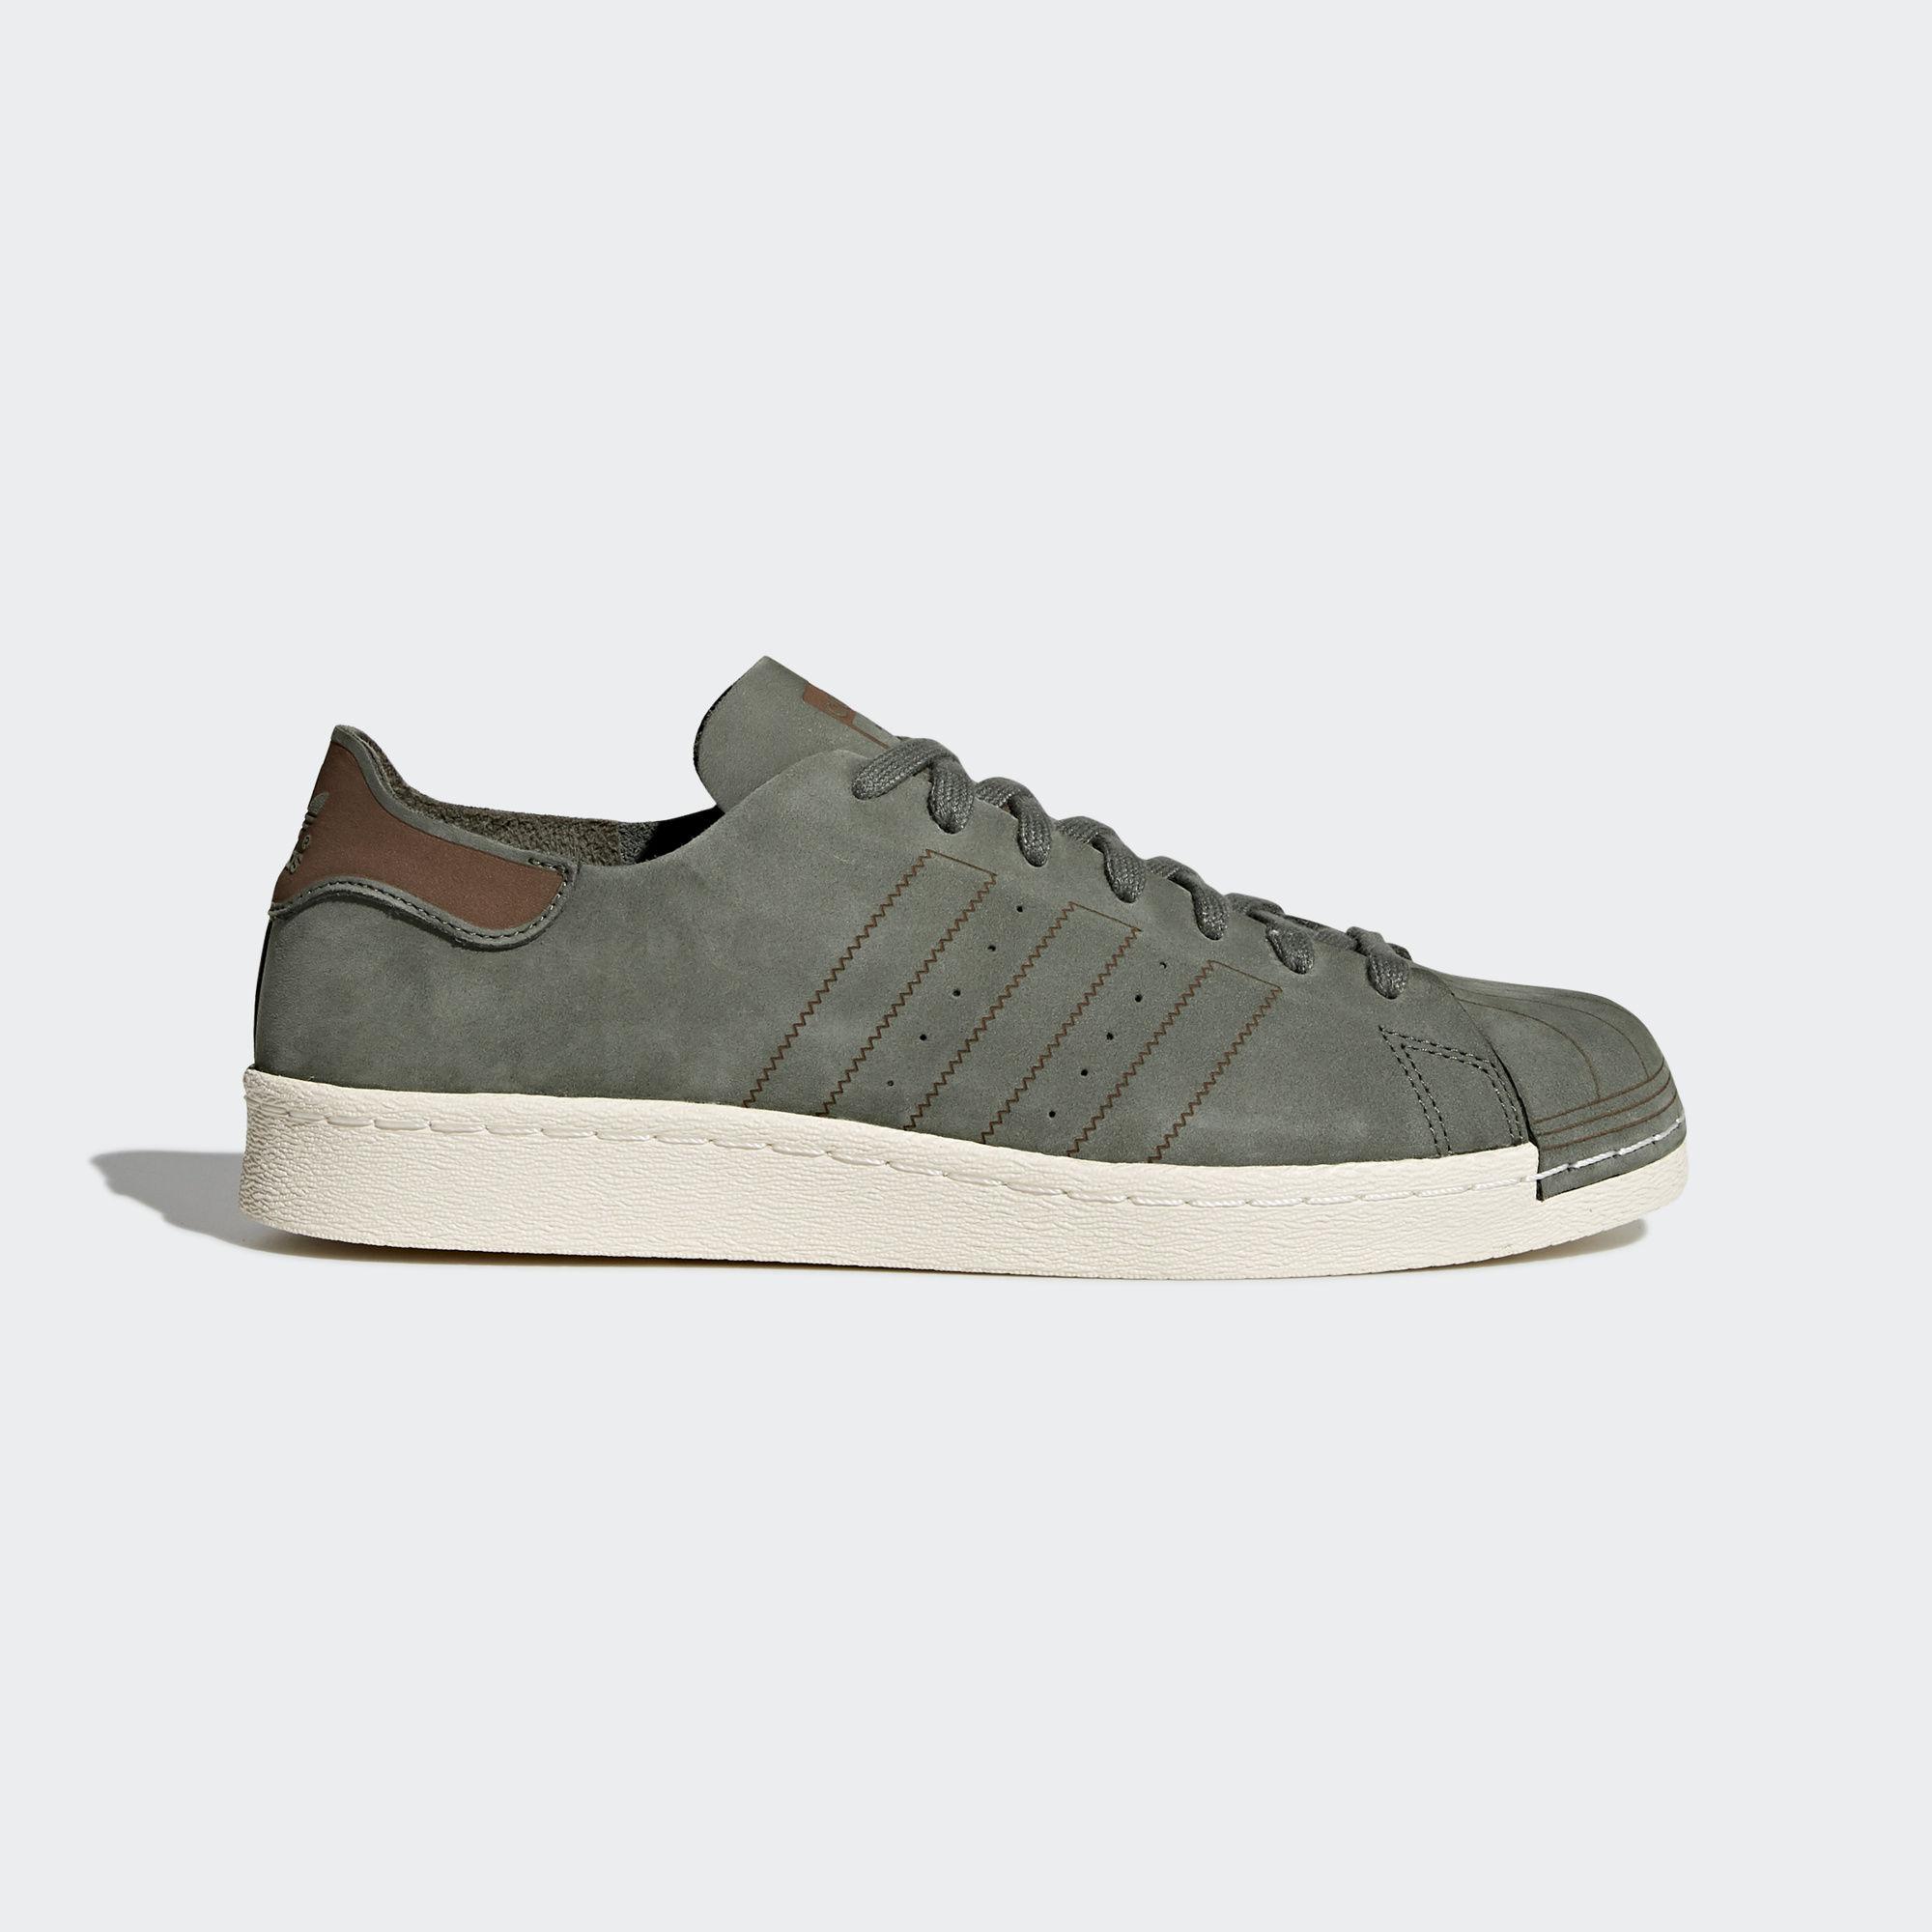 adidas Leather Superstar 80s Decon Shoes in Green - Lyst